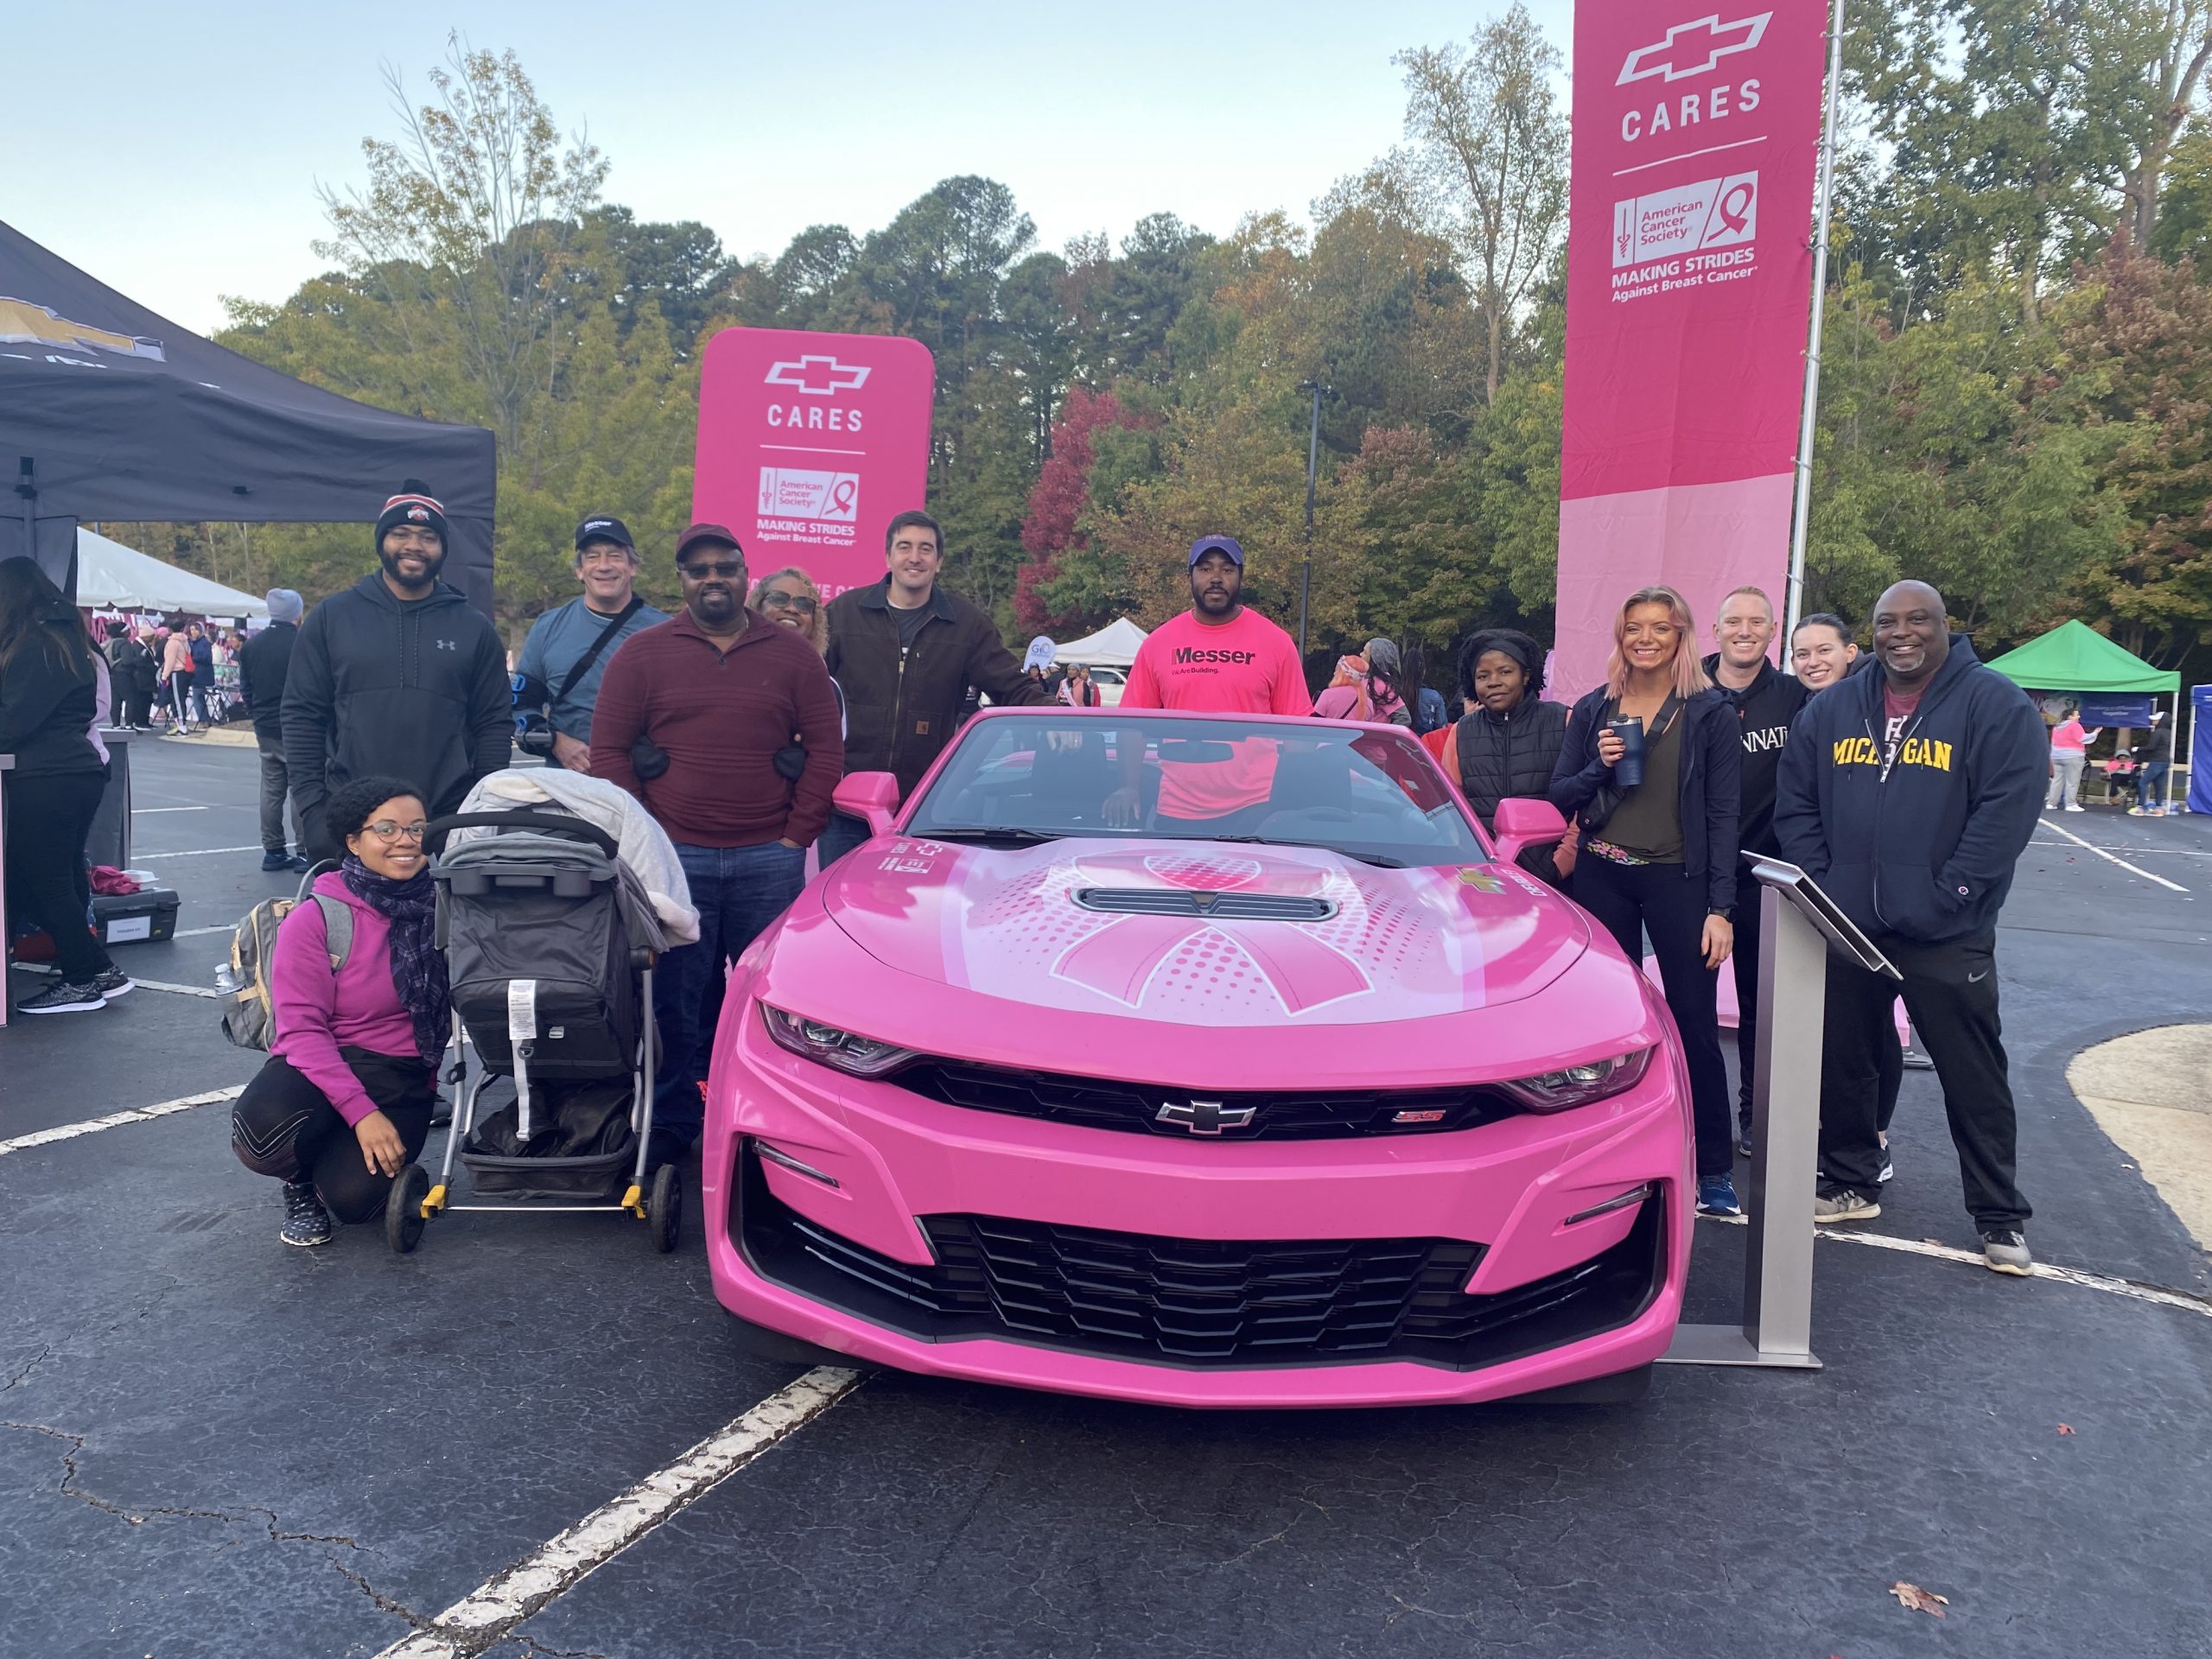 Messer Construction Company employees posing in front of a pink car at a Breast Cancer Walk